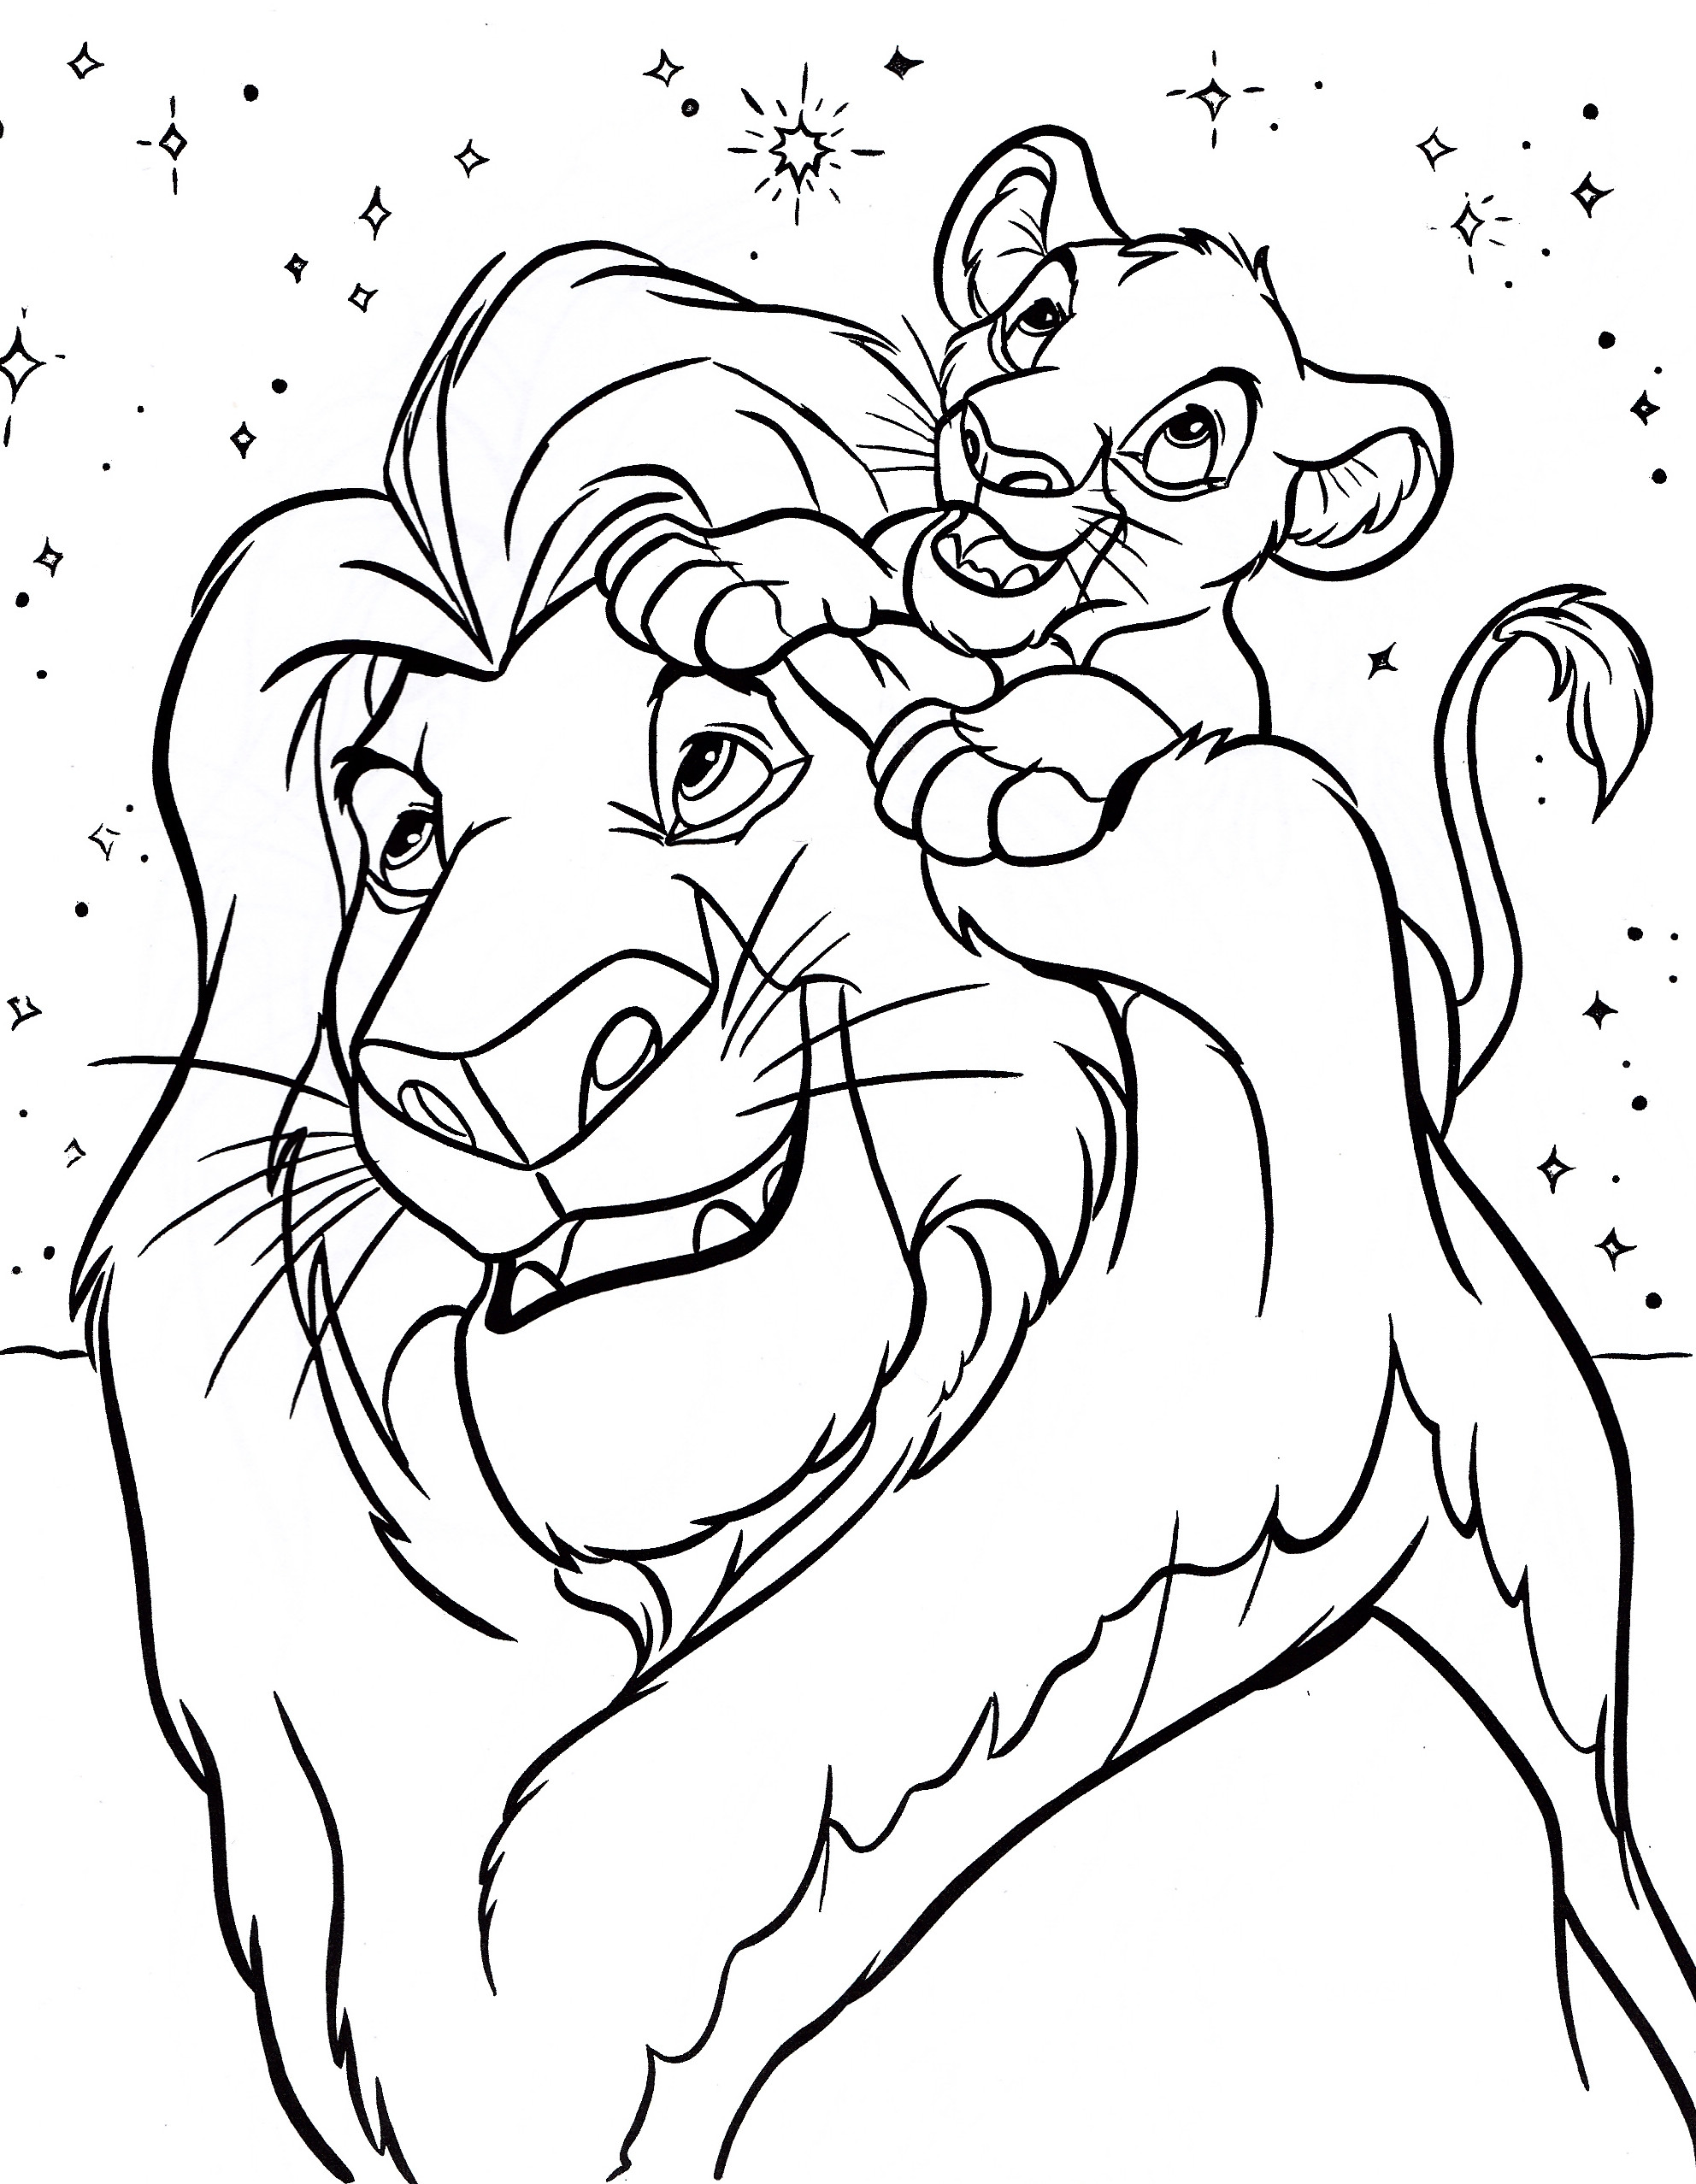 Boys Disney Coloring Pages
 disney coloring pages for boys free